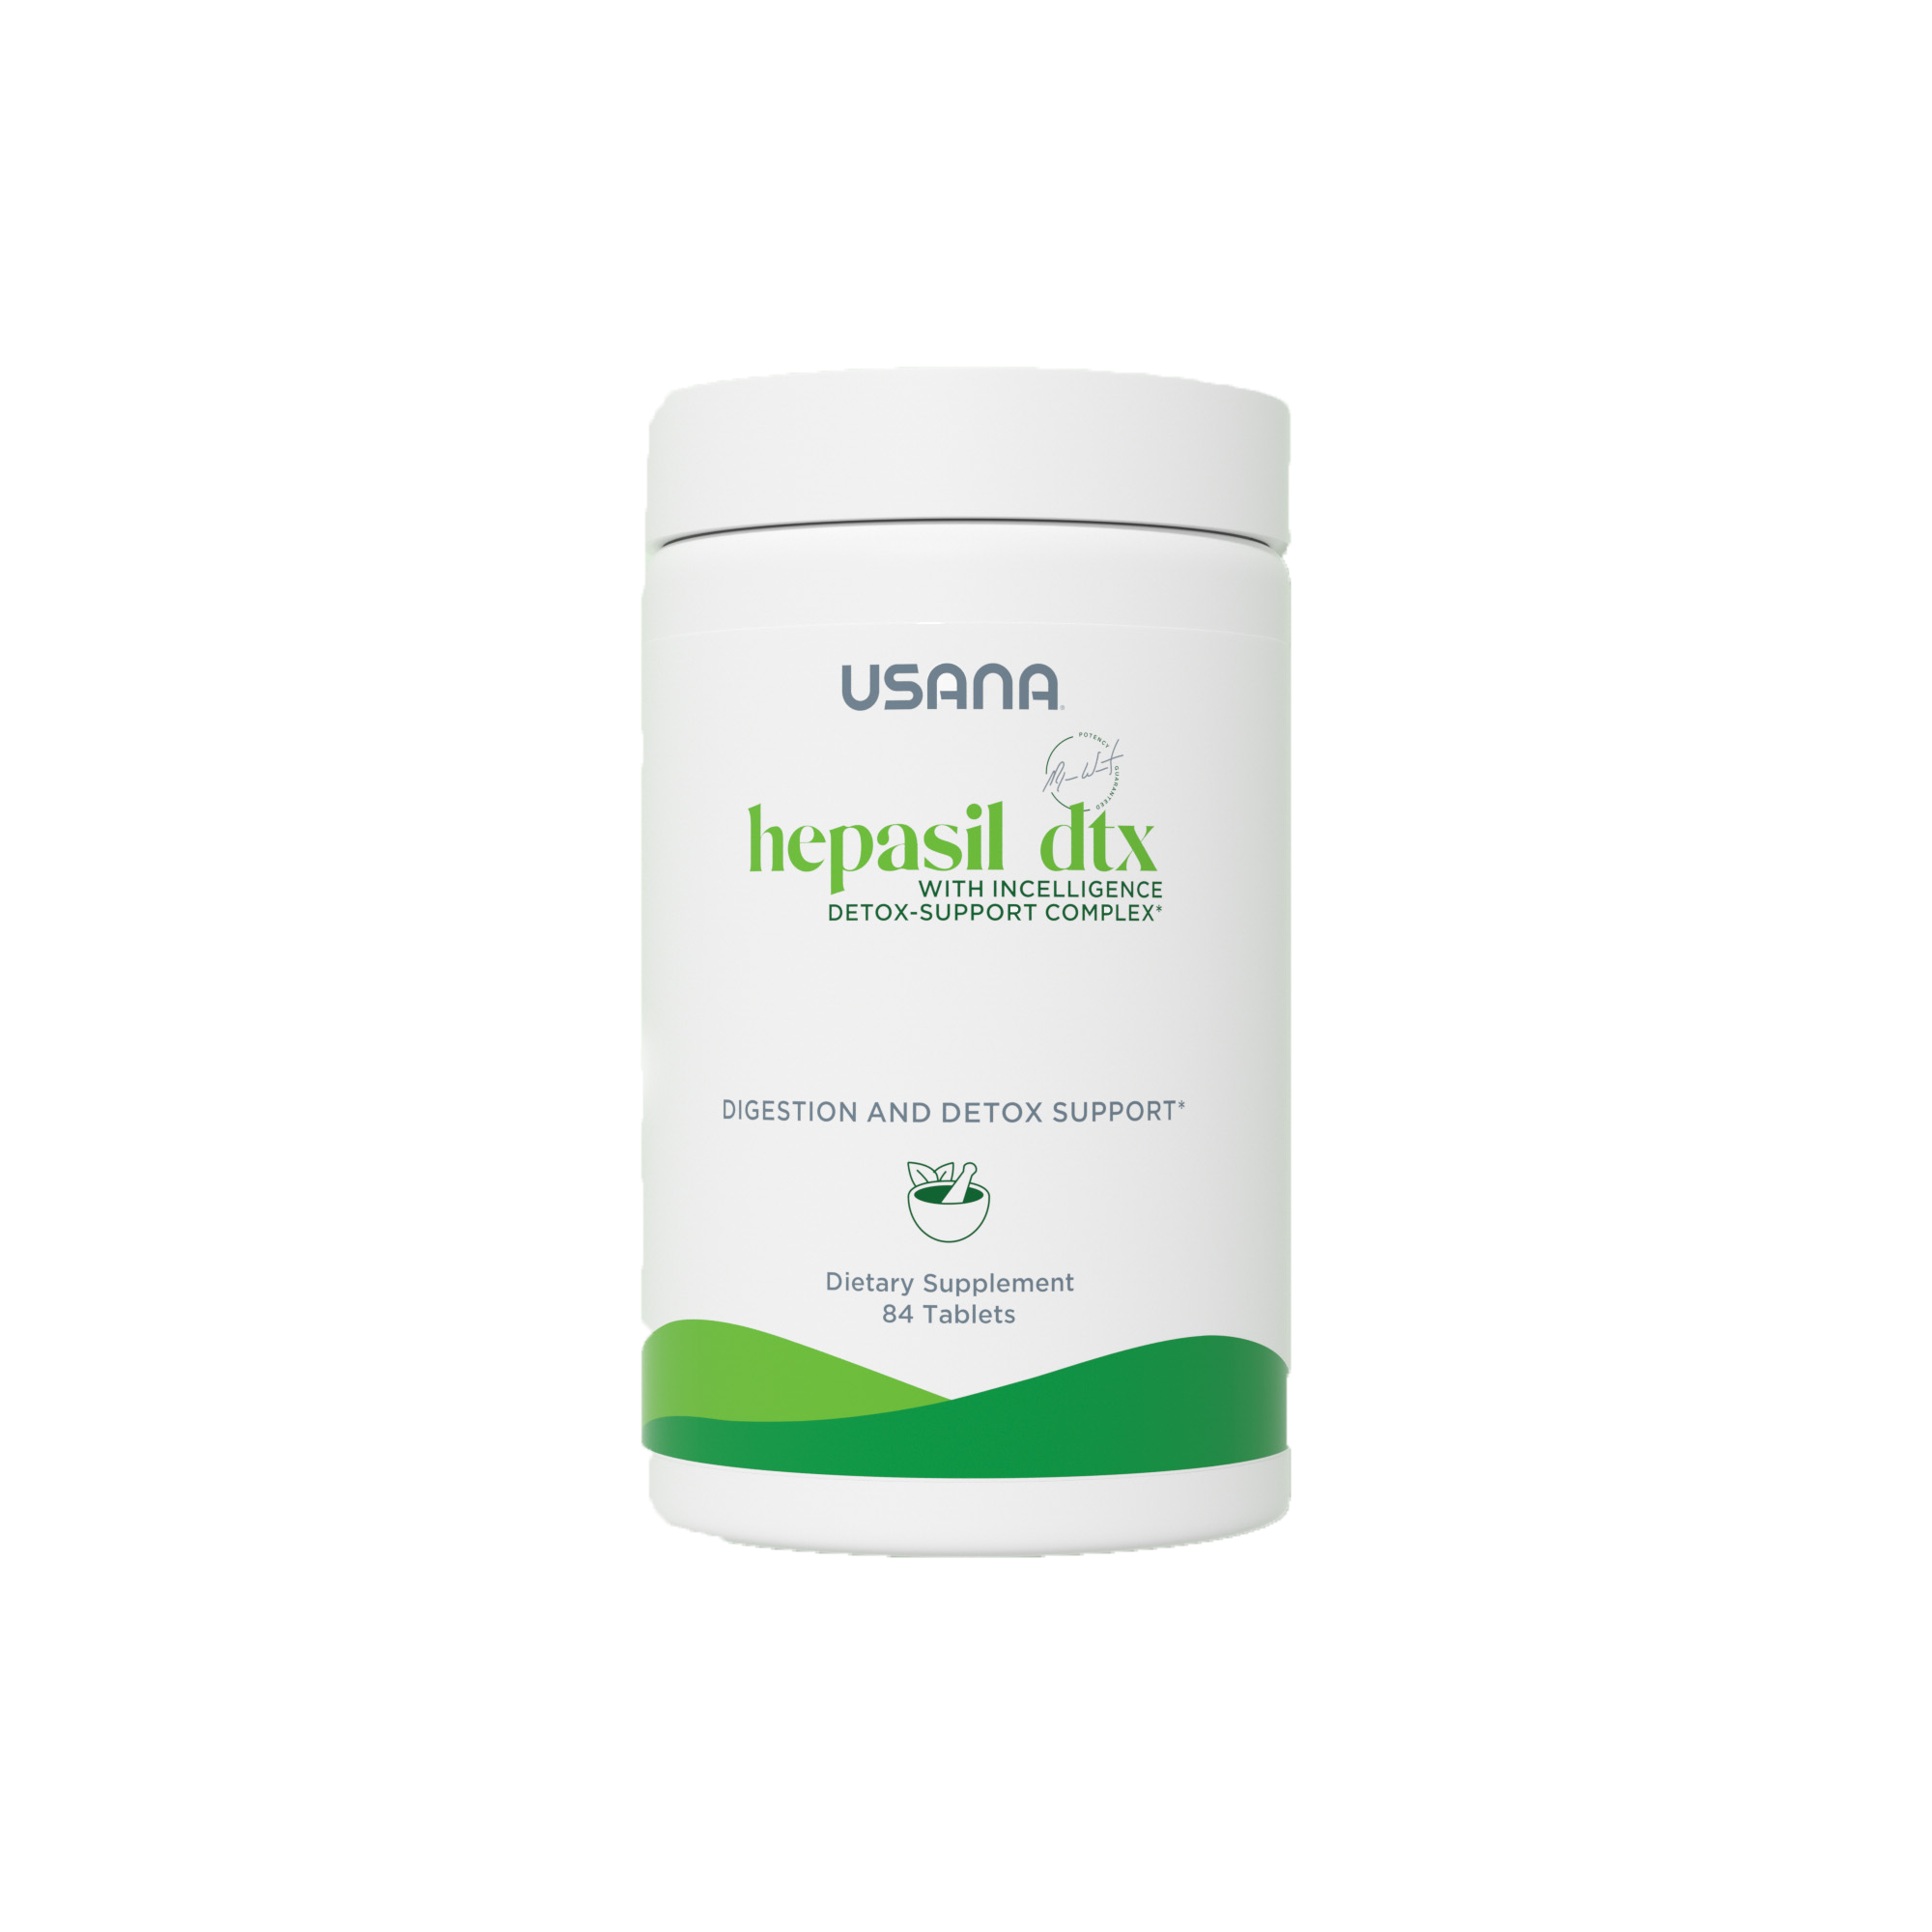 USANA Hepasil DTX - Liver-Support Supplement for Adults Canada